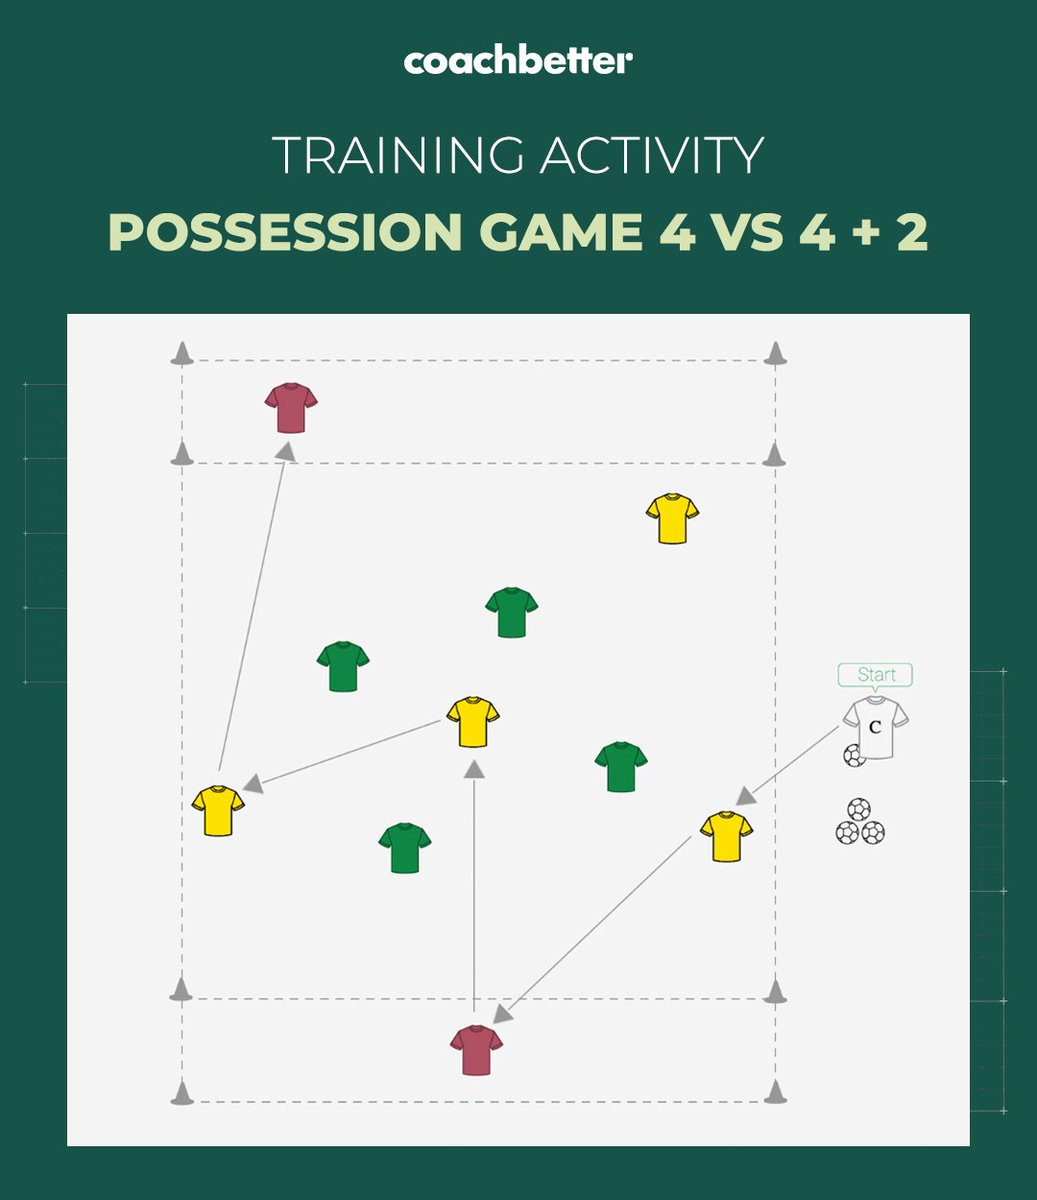 Prepare your players for a match with this possession-based 4 vs 4 + 2 practice 🙌 ⚽Two focus areas: against the ball, and in-possession ⚽Progression: Limit the number of touches #coachbetter #footballcoaching #footballcoach